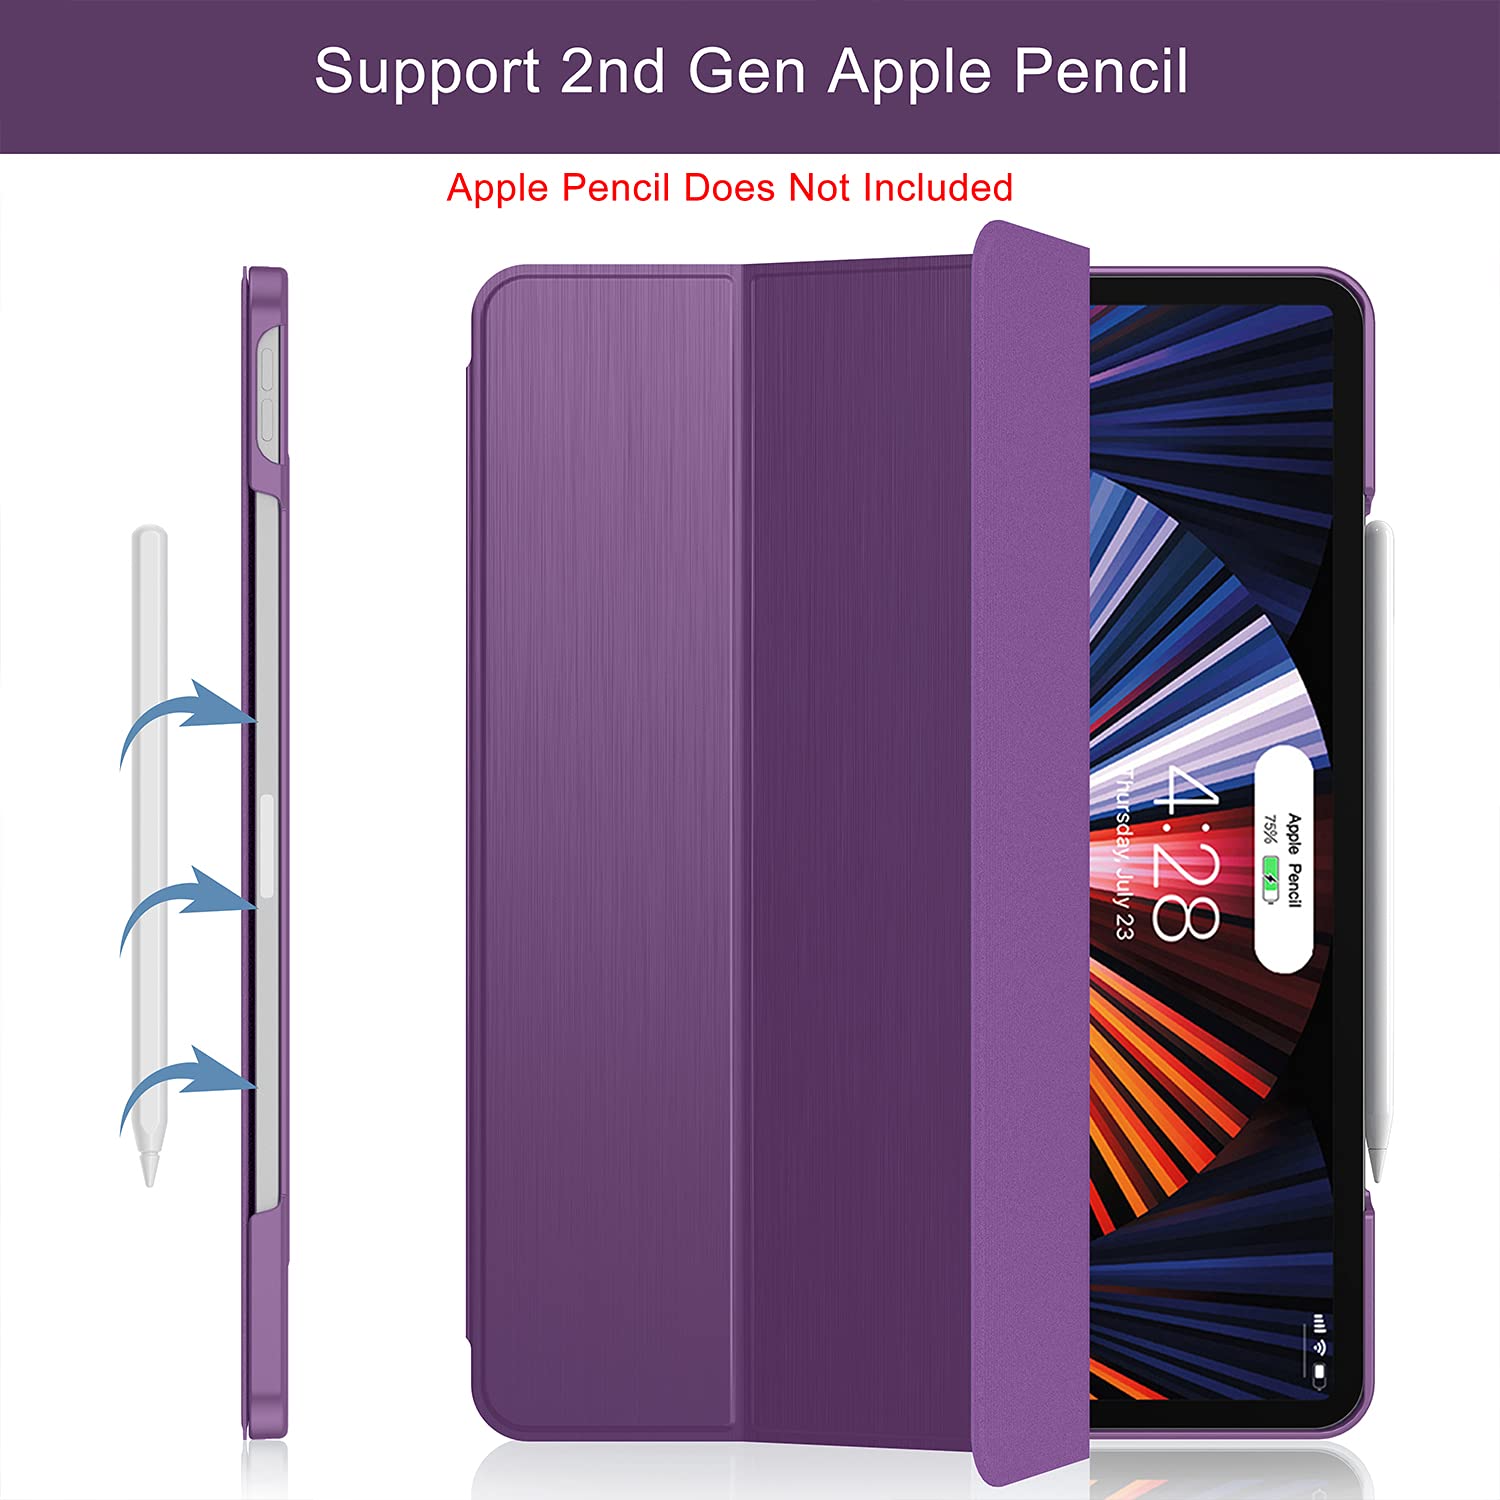 Soke New iPad Pro 12.9 Case 2021(5th Generation) - [Slim Trifold Stand + 2nd Gen Apple Pencil Charging + Smart Auto Wake/Sleep],Premium Protective Hard PC Back Cover for iPad Pro 12.9 inch(Purple)